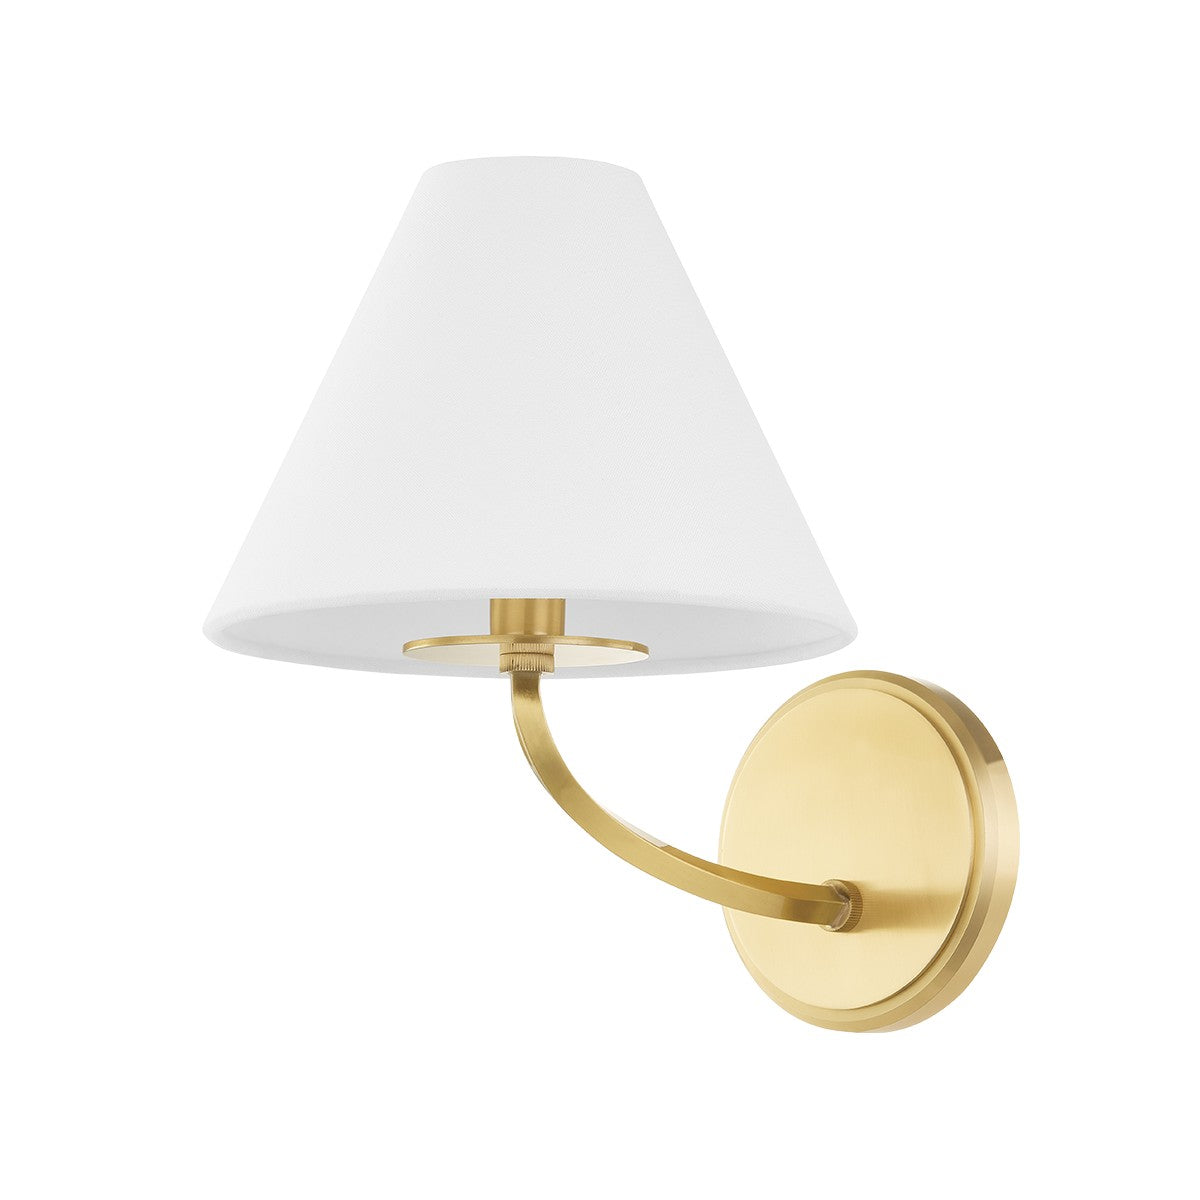 Hudson Valley - BKO900-AGB - One Light Wall Sconce - Stacey - Aged Brass